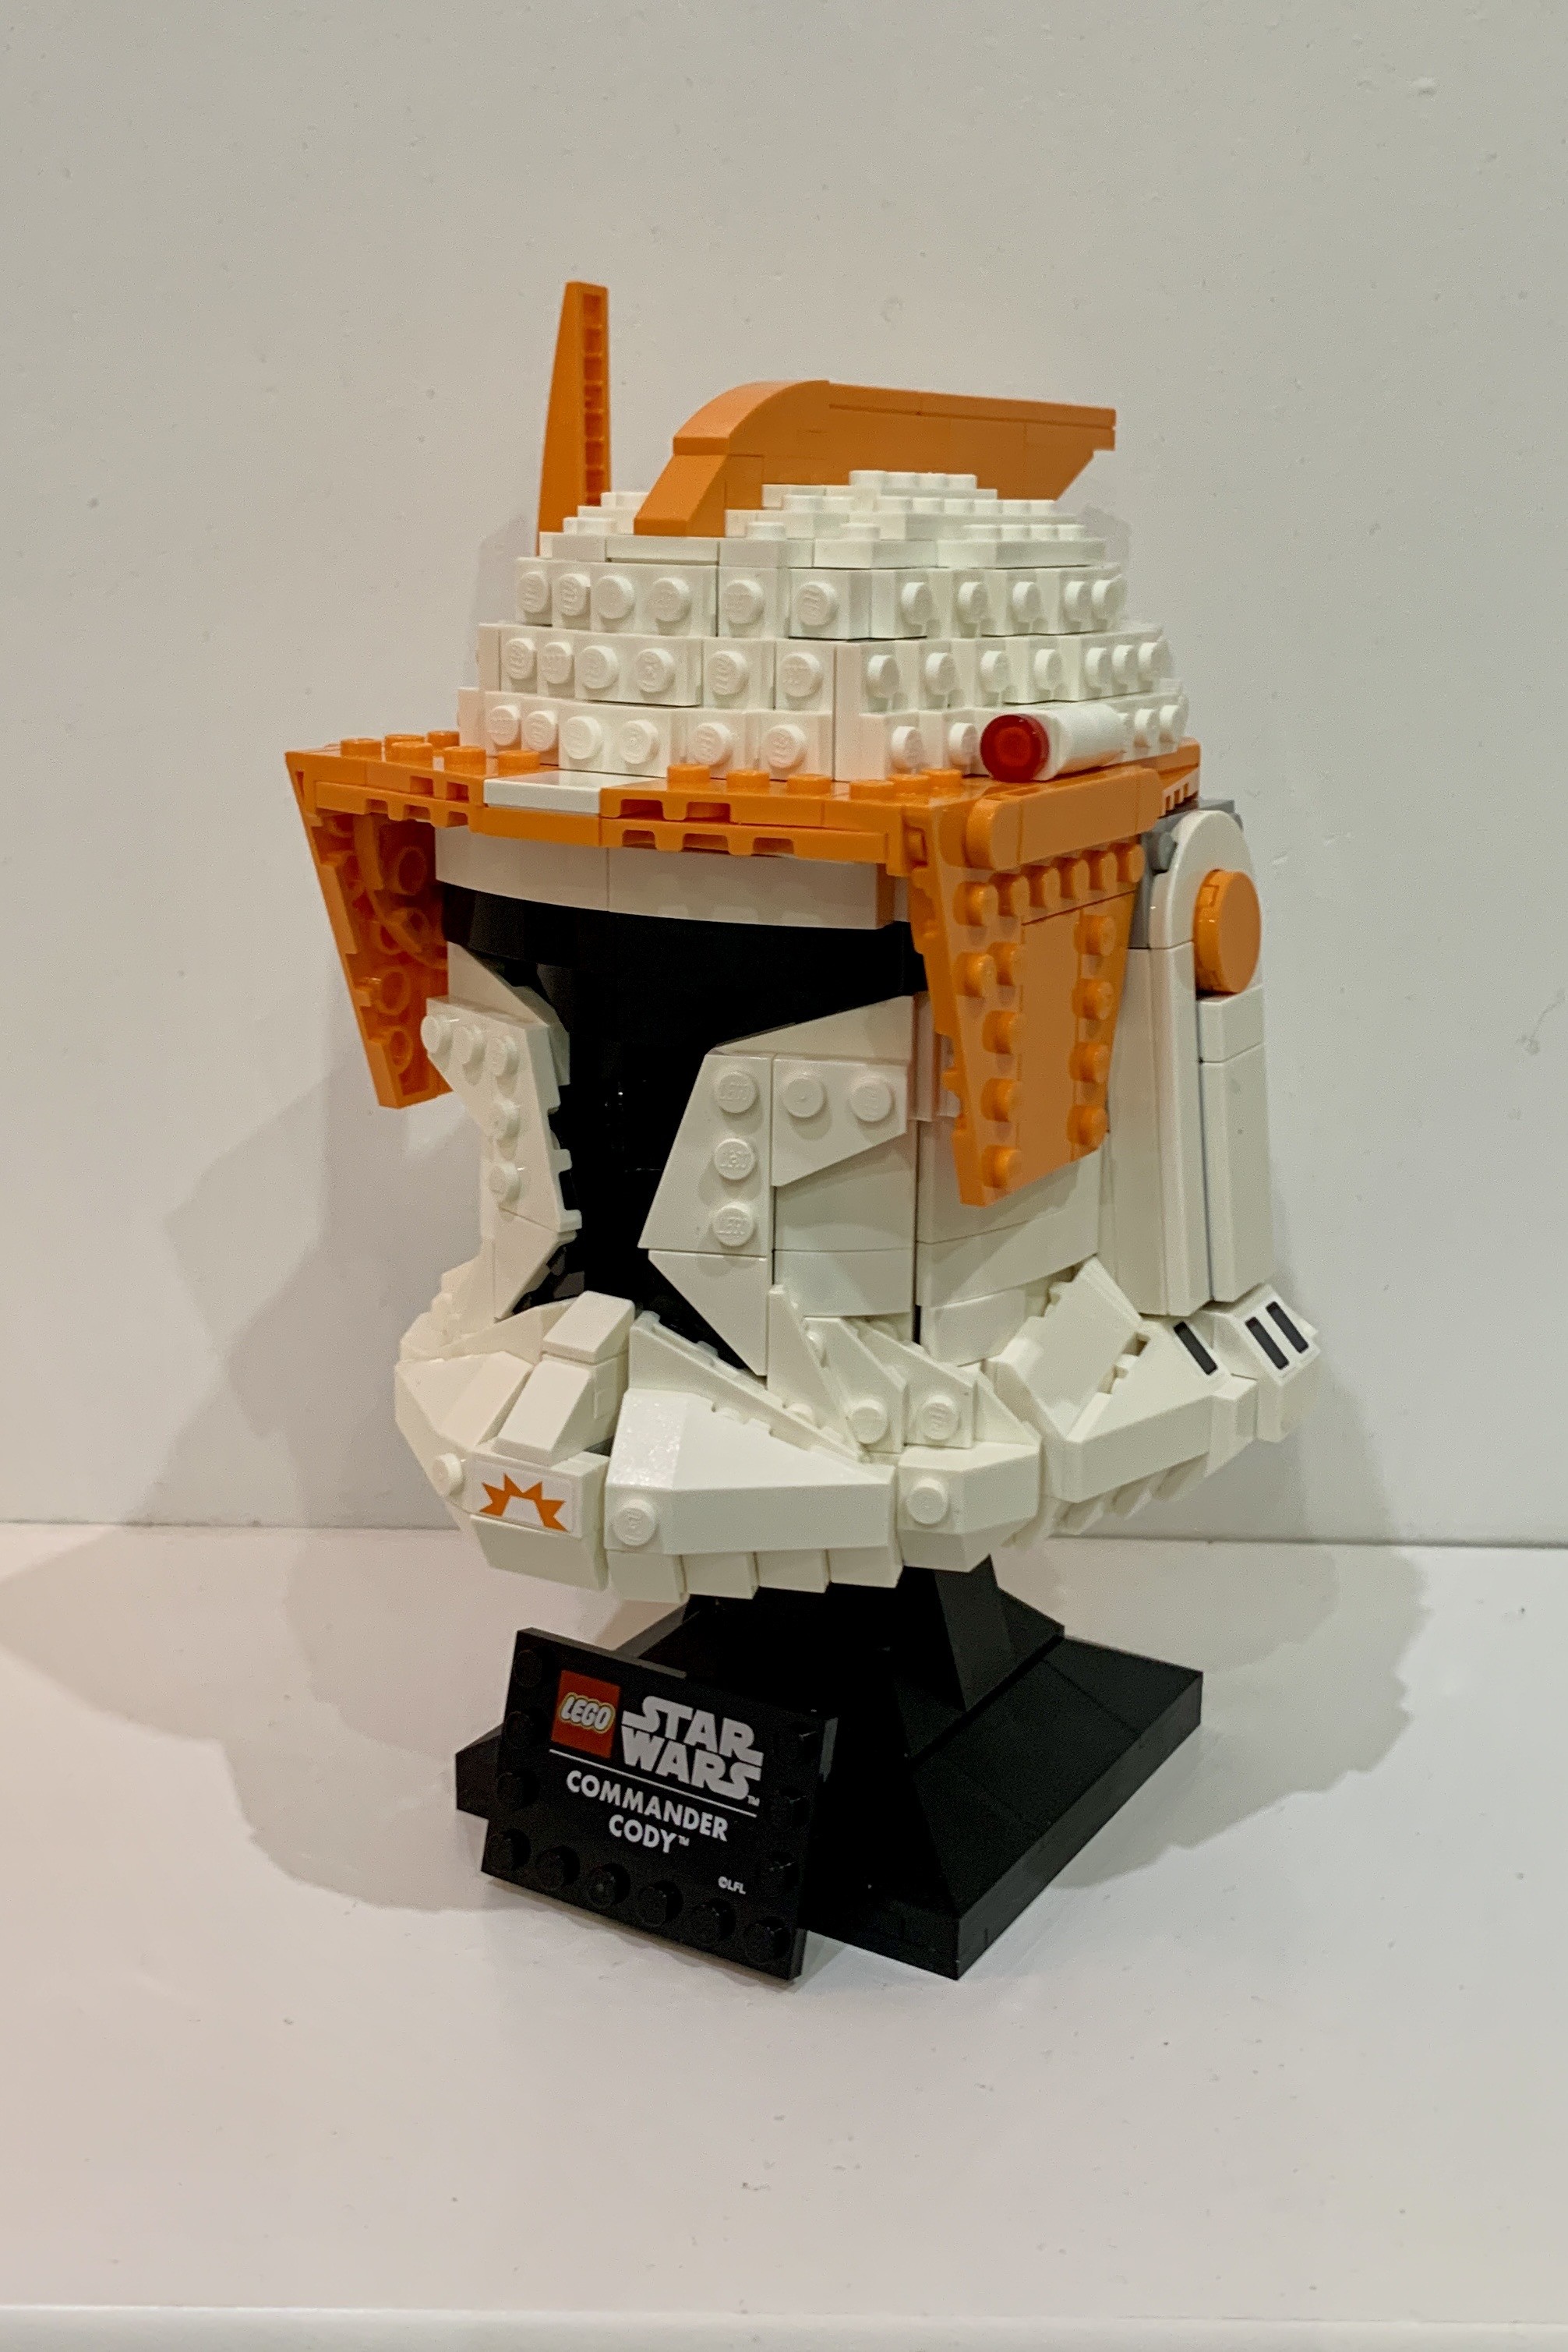 Lego model of Commander Cody’s helmet from the Clone Wars TV show. It is a white helmet with black visor. It has orange visor protectors,an orange antenna and a small orange fin on top of the helmet. It is on top of a black stand with a plaque that has the Lego StarWars combined logo and “Commander Cody™️”